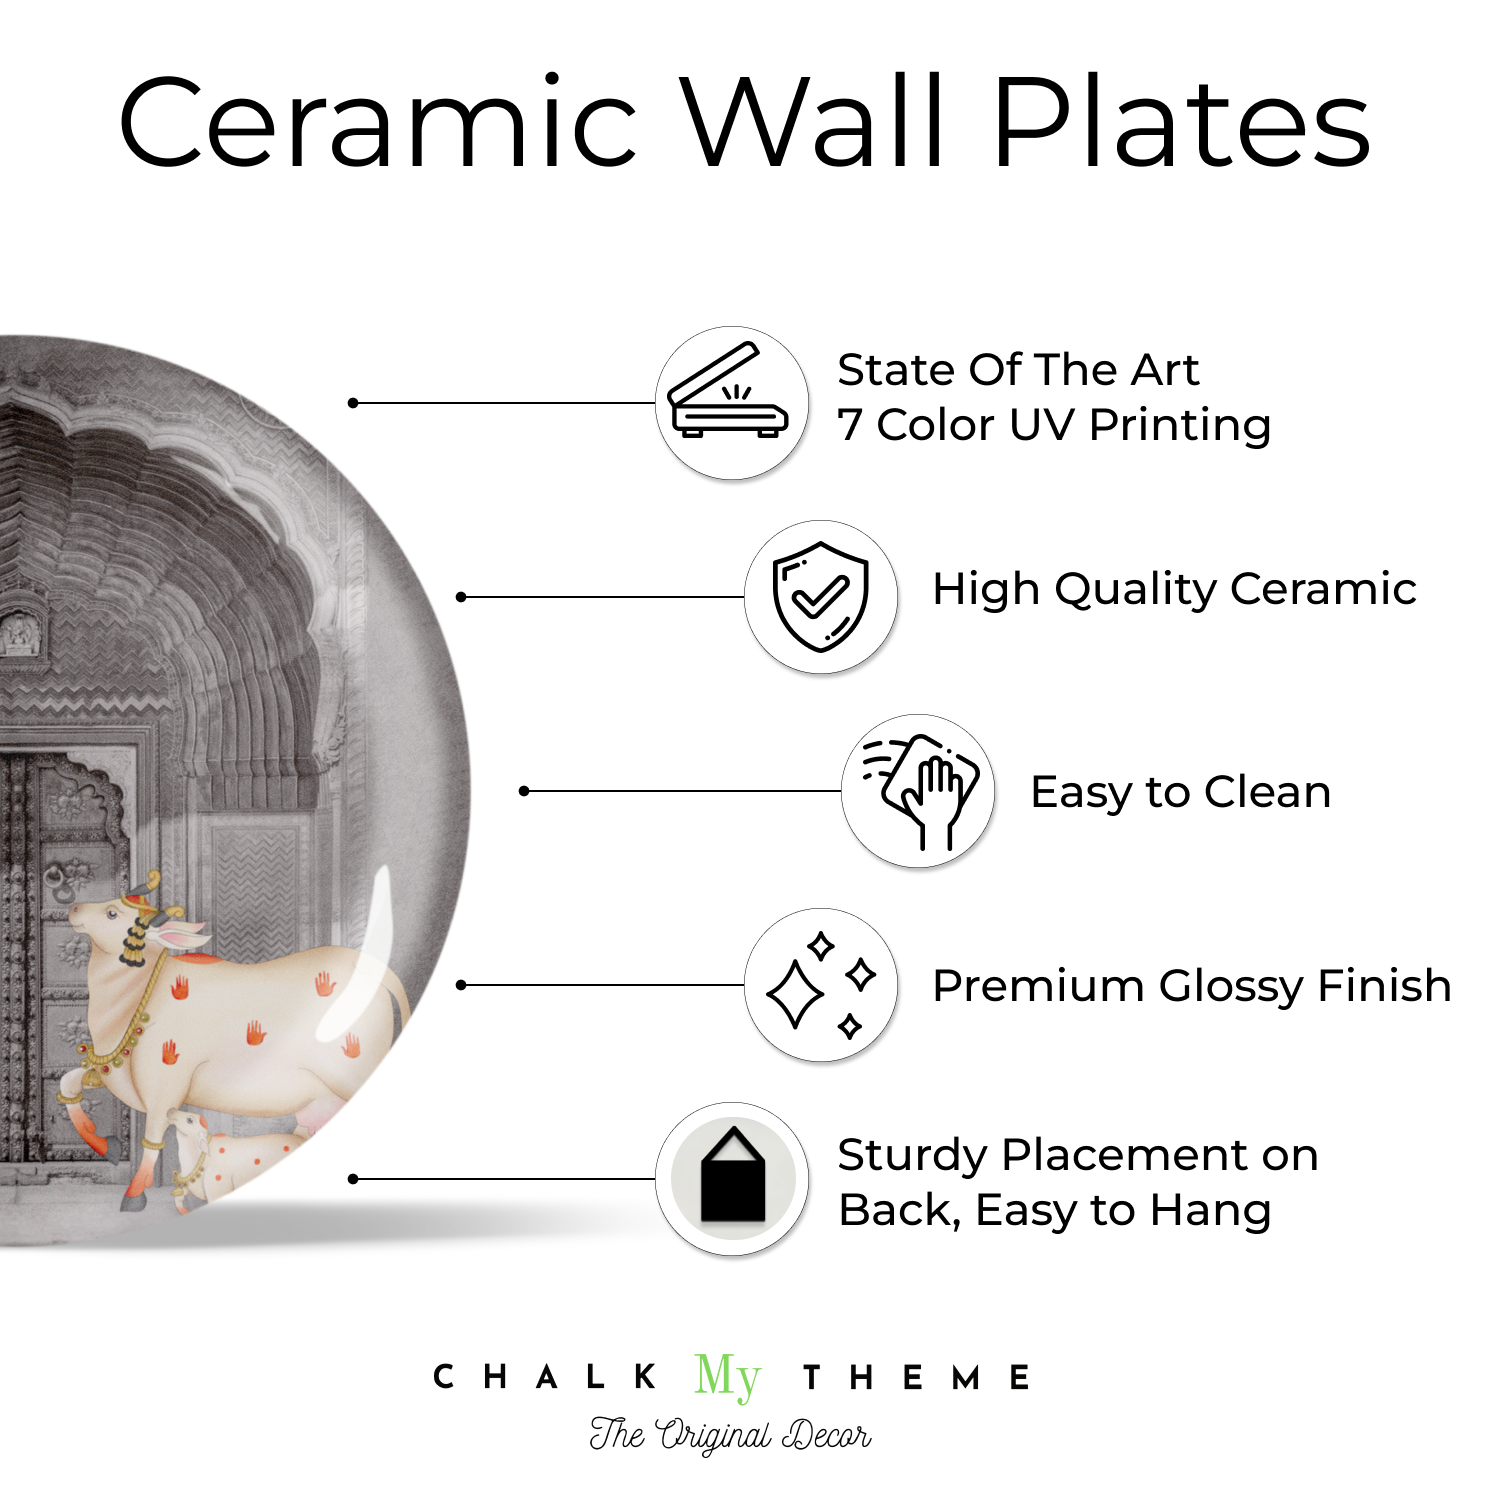 Unique ceramic art inspired by Indian traditions cow and calf wall plate for home decor